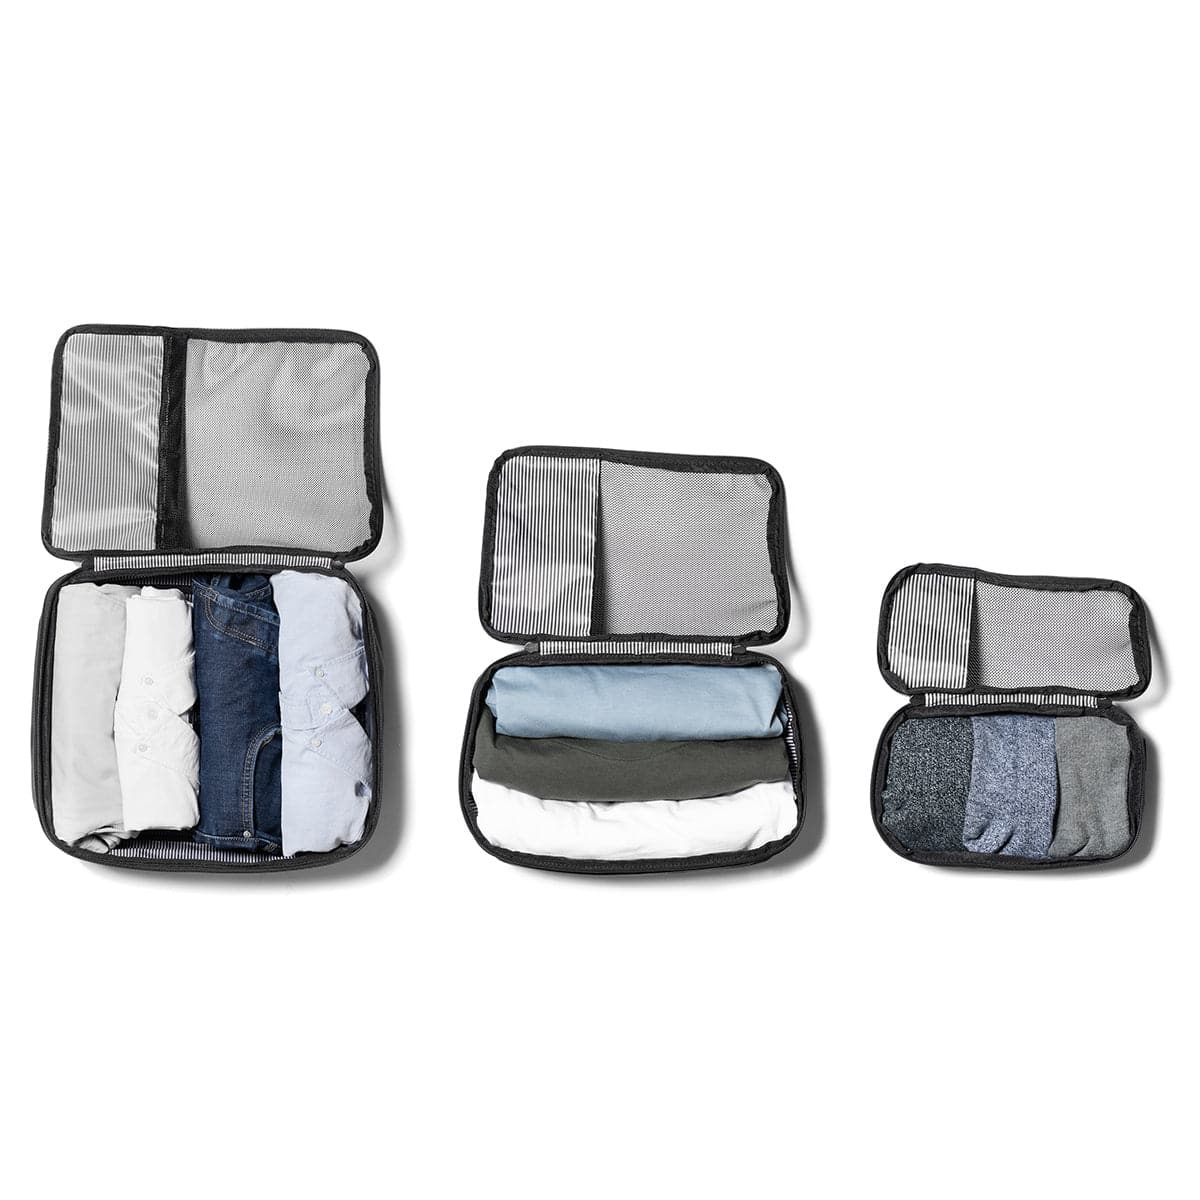 PKG Union Recycled Compression Packing Cubes - 3 Pack